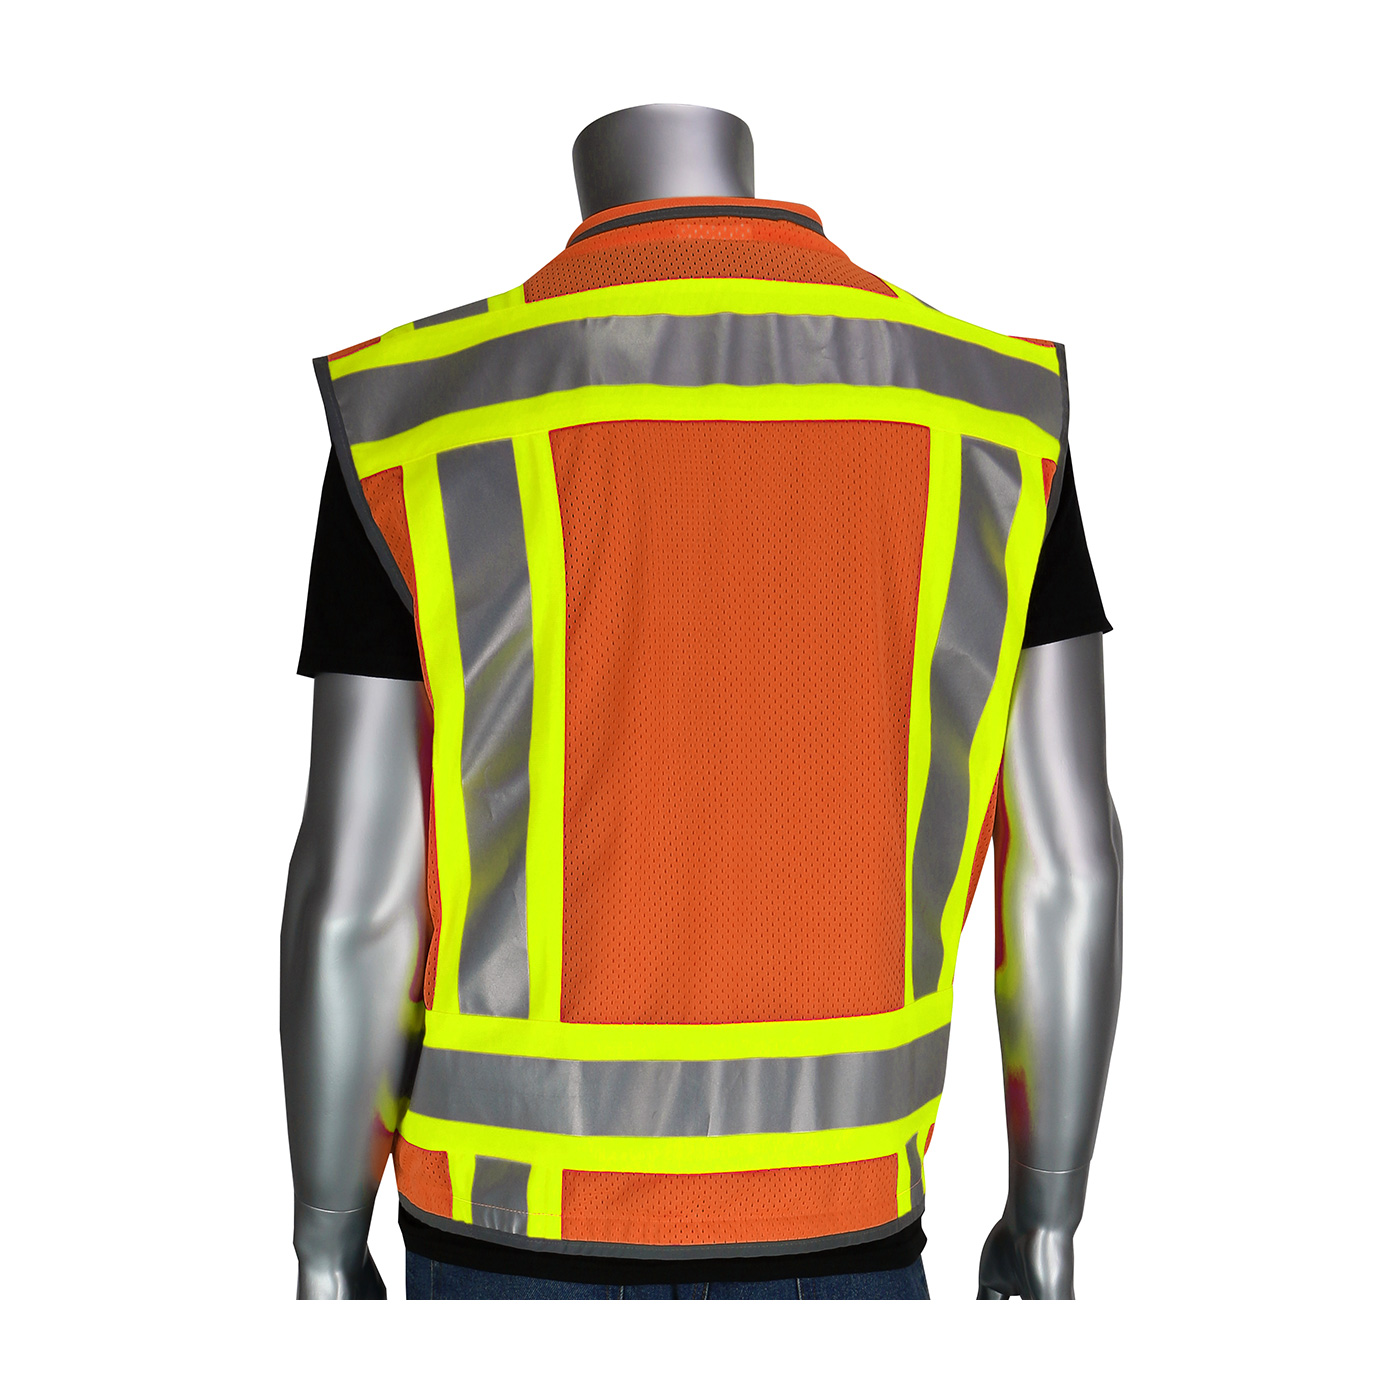 PIP® ANSI Type R Class 2 Orange Two-Tone Fifteen Pocket Tech-Ready Ripstop Surveyors Vest with Mesh Back #302-0900